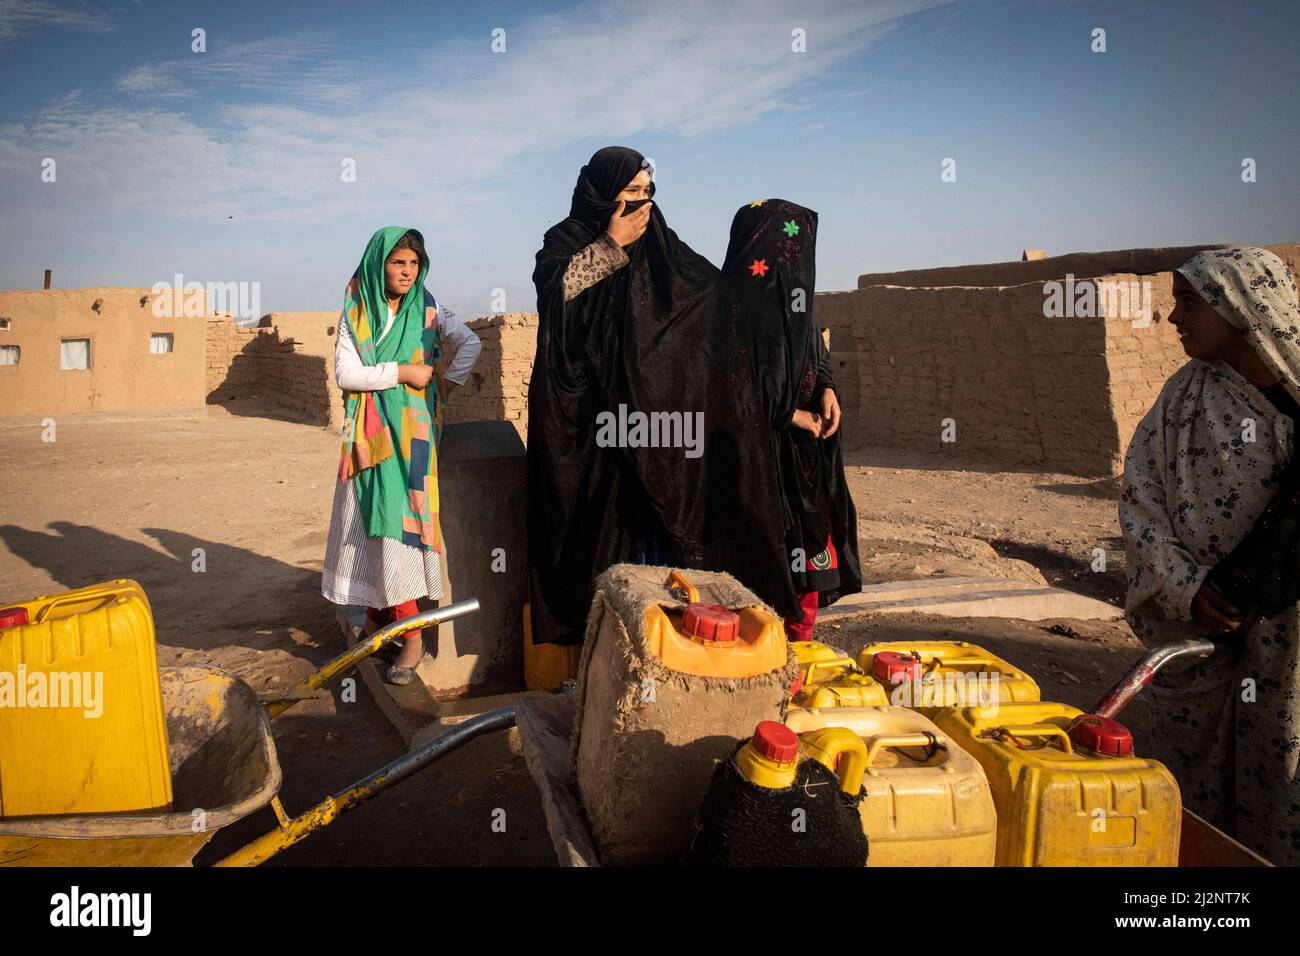 Afghan girl is sold due to poverty in Afghanistan in Sheidaee Camp near to Herat, Afghanistan. Stock Photo